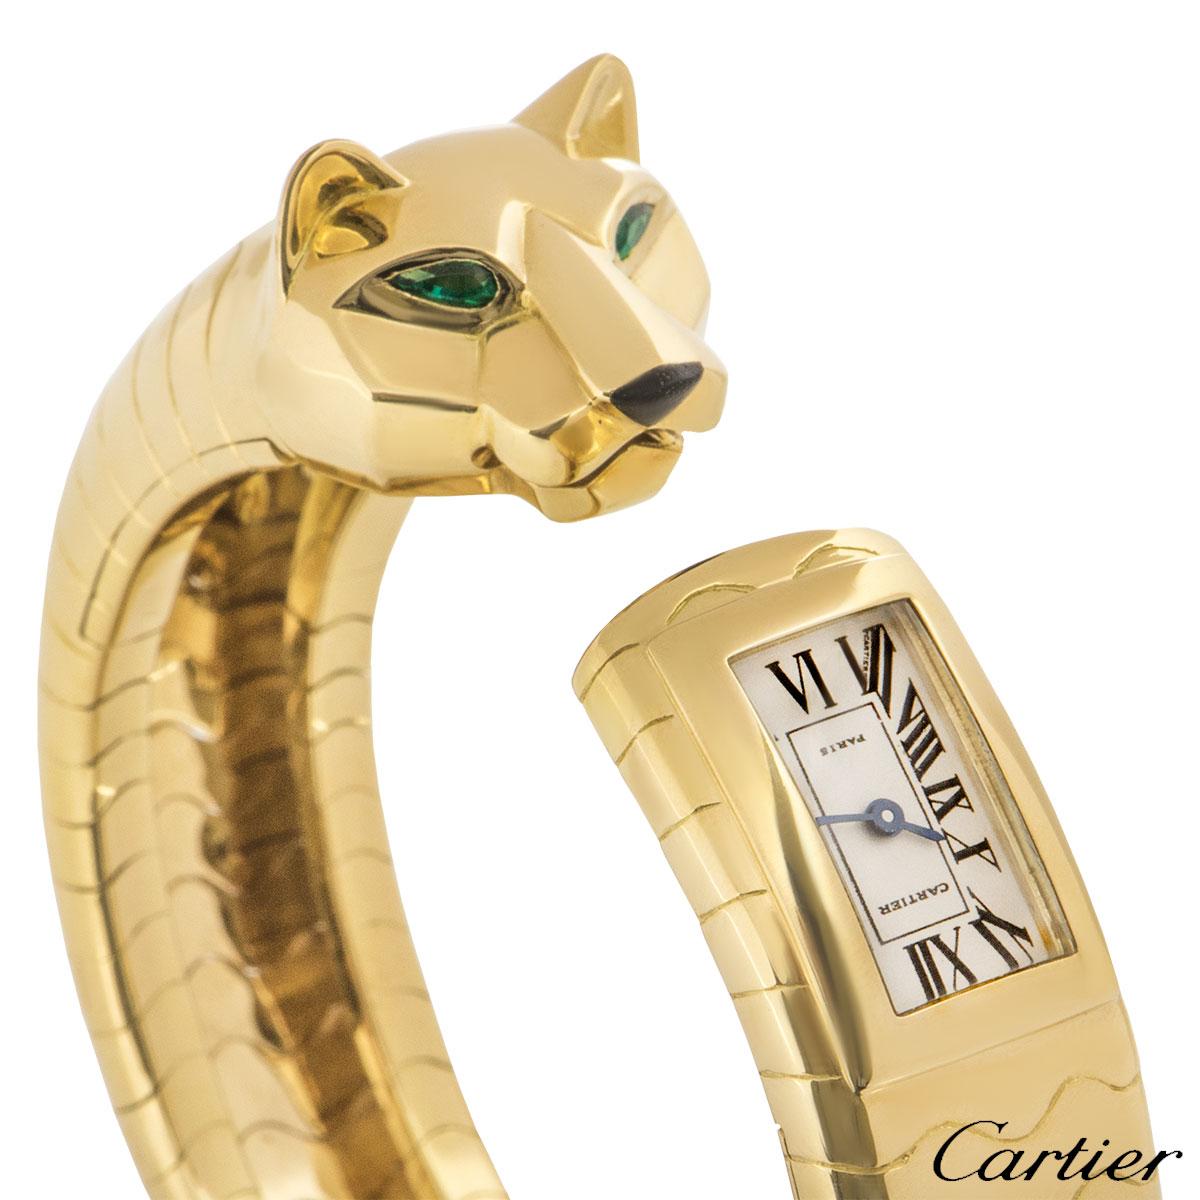 A rare 18k yellow gold cuff bangle watch by Cartier from the Panther Lakard collection. The yellow gold cuff bangle features a panther head set with emerald eyes and an onyx nose on one end and the watch on the other which features a quartz movement